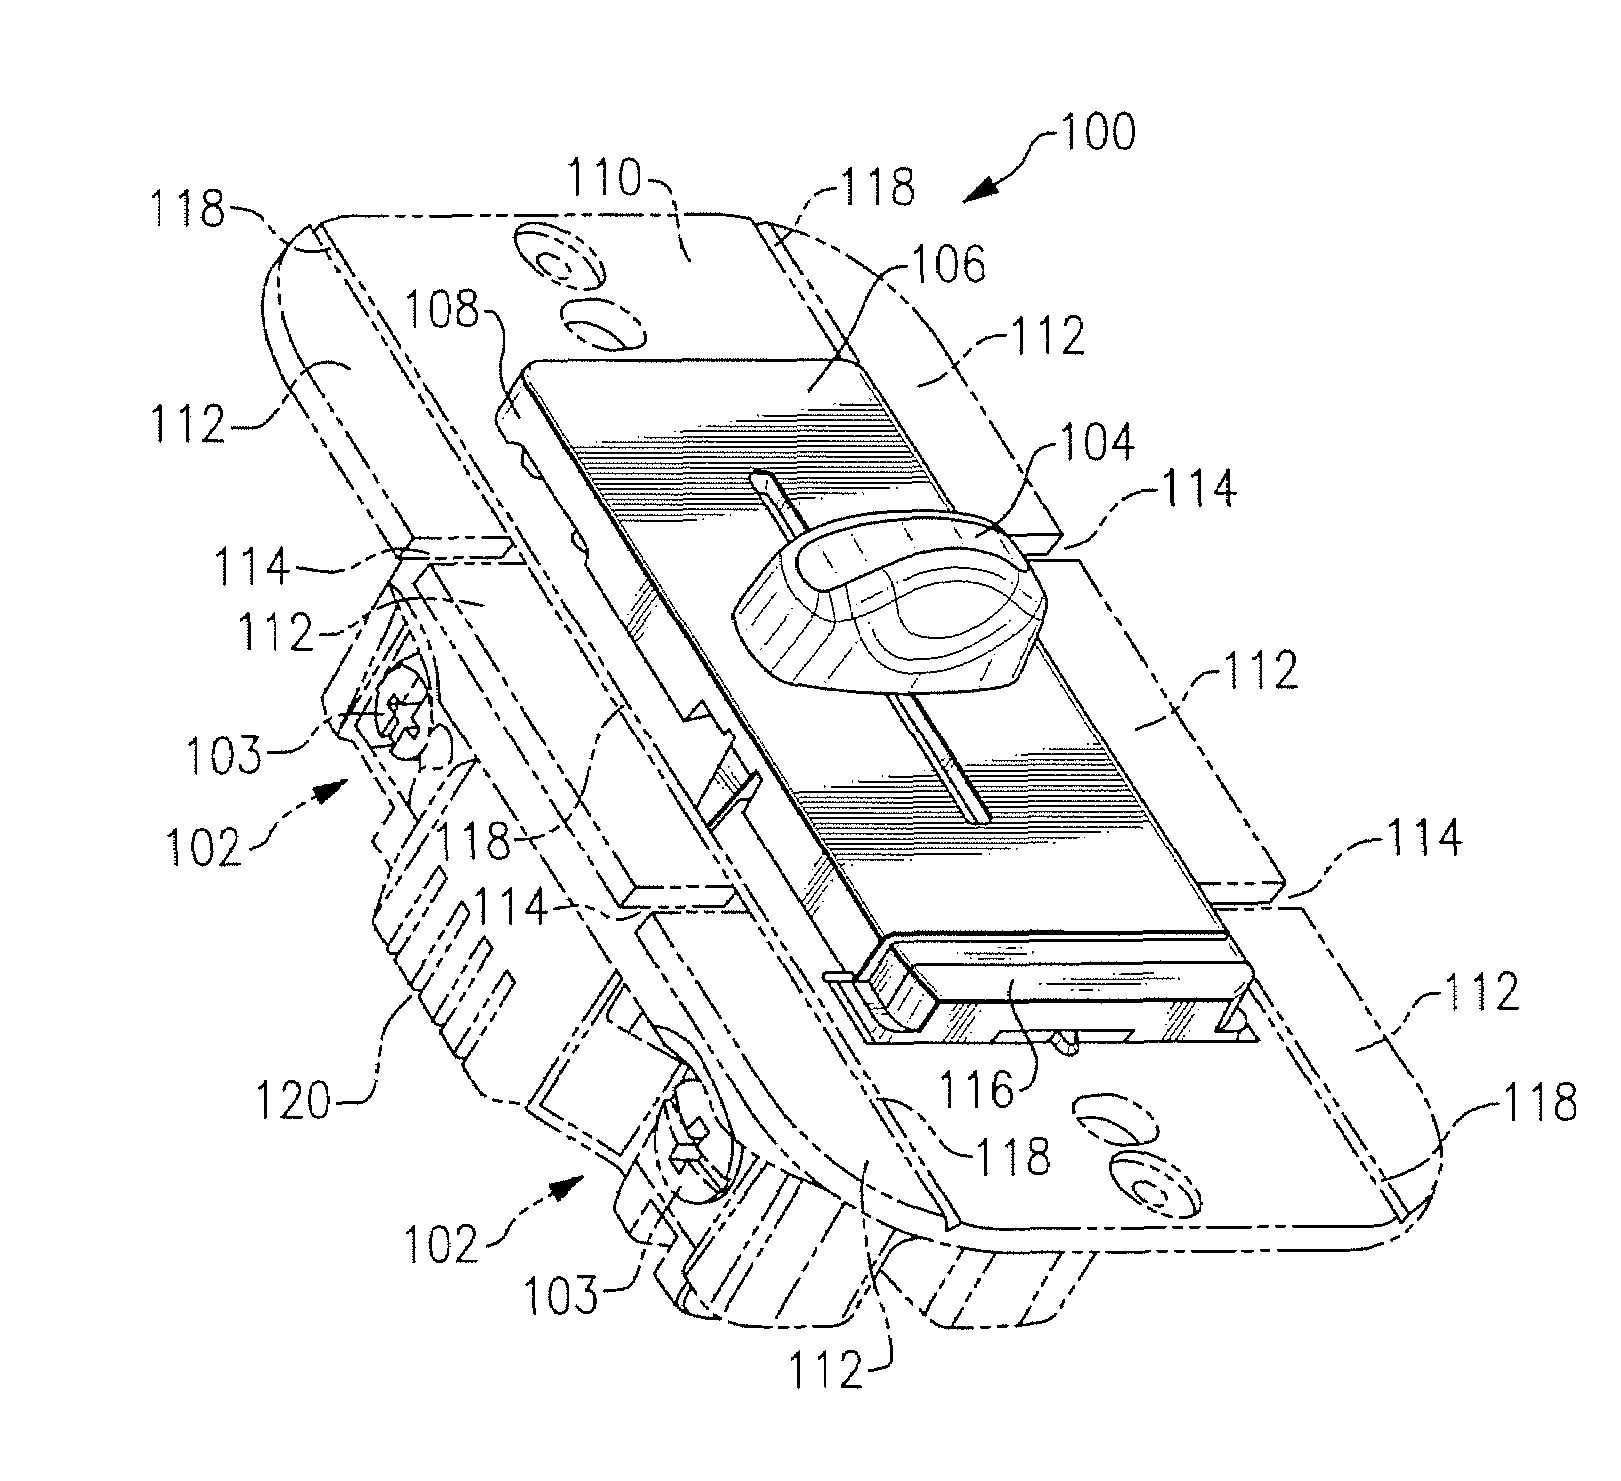 Power control device for an electrical load